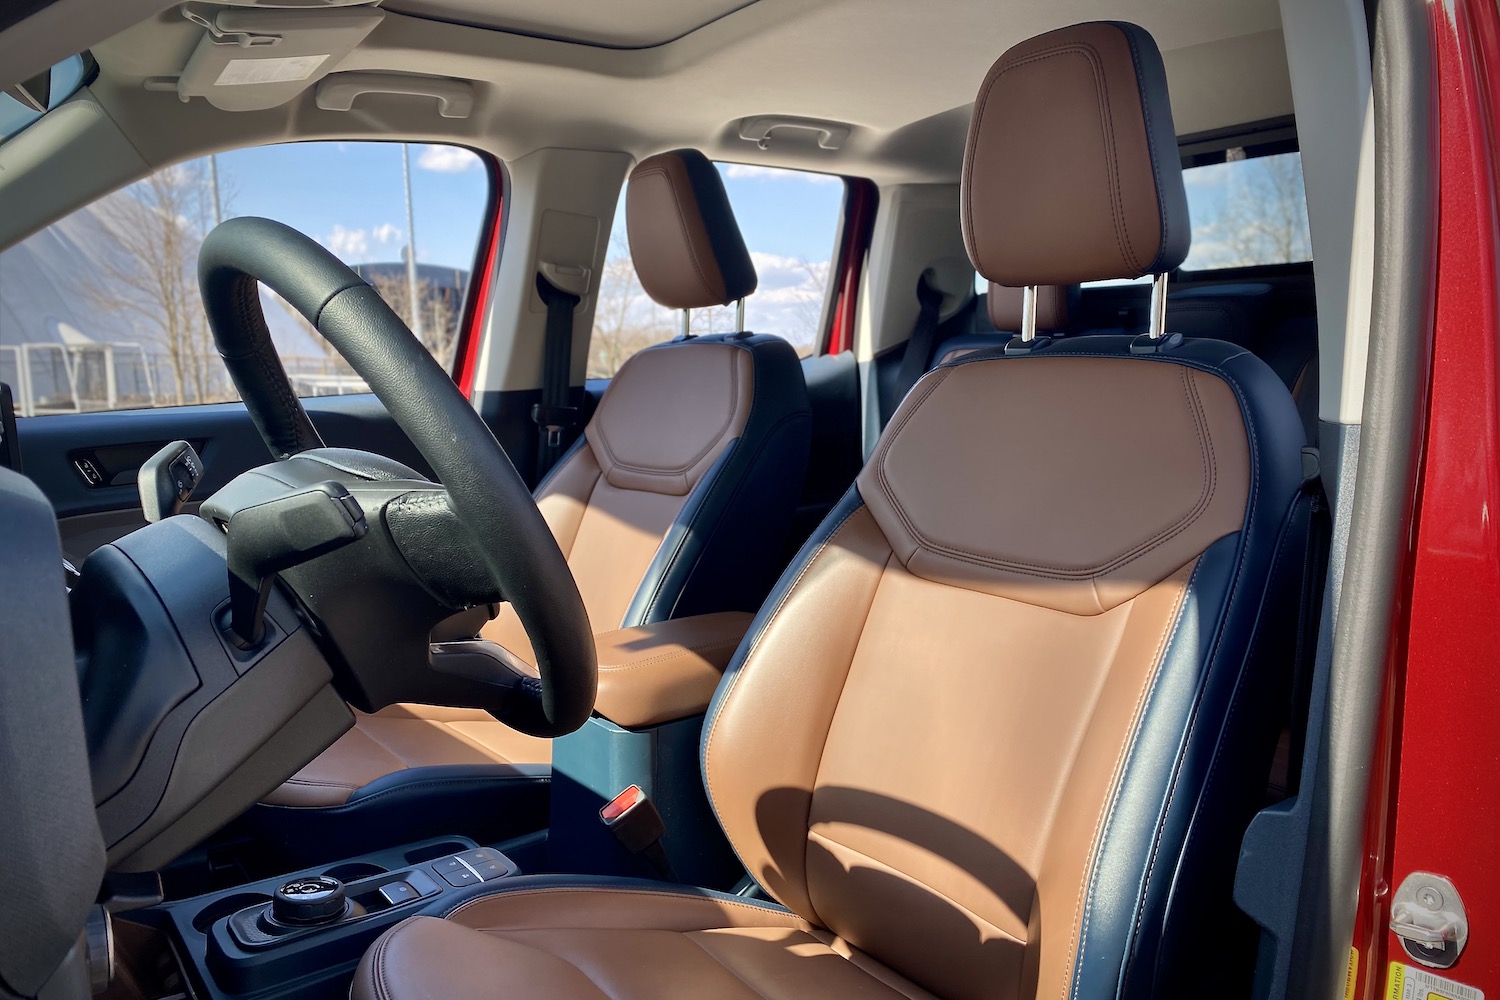 2022 Ford Maverick front seats from driver's side outside the vehicle with blue skies in the back.